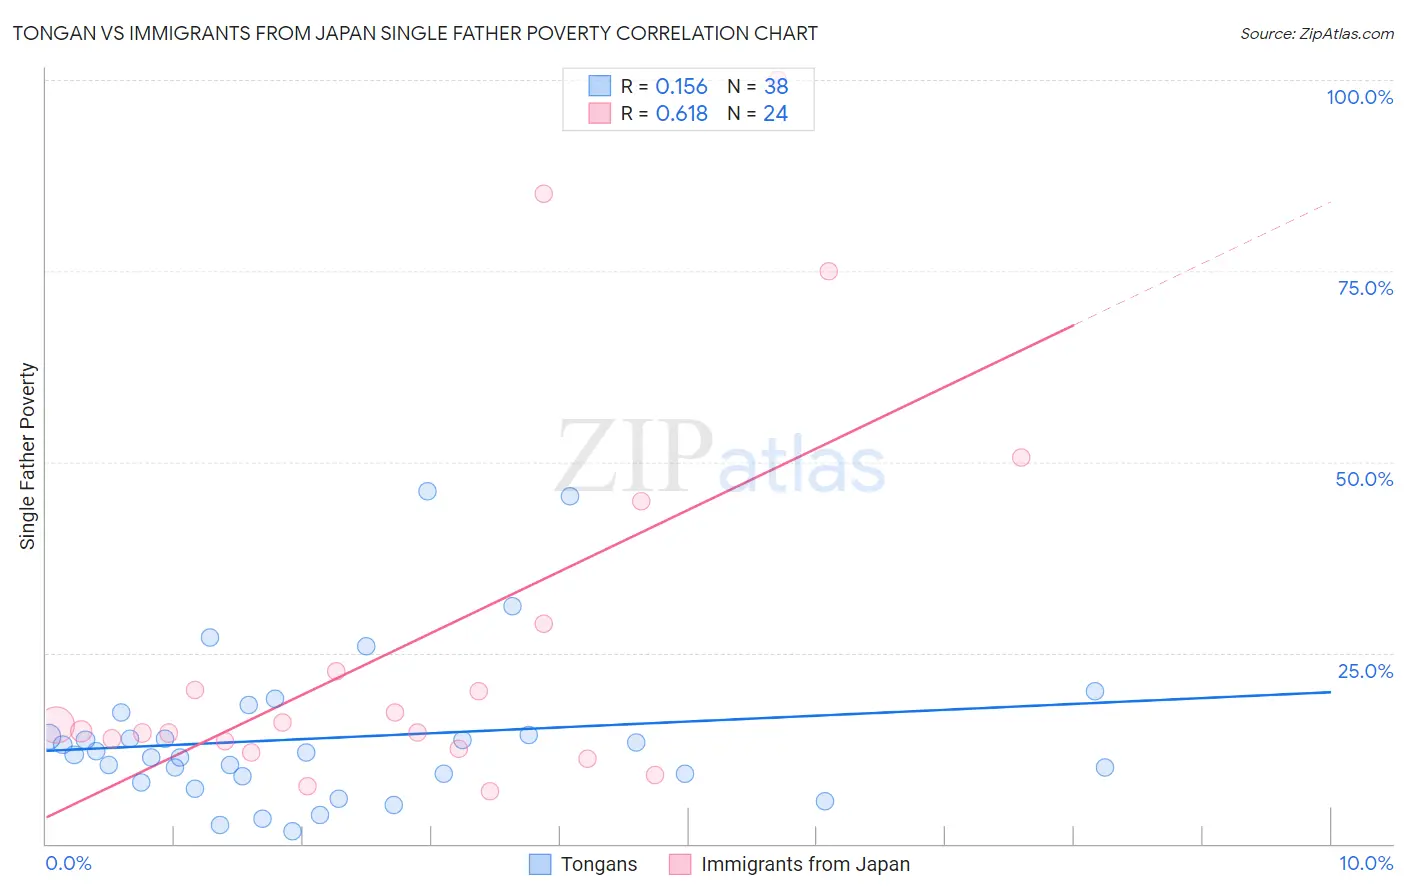 Tongan vs Immigrants from Japan Single Father Poverty